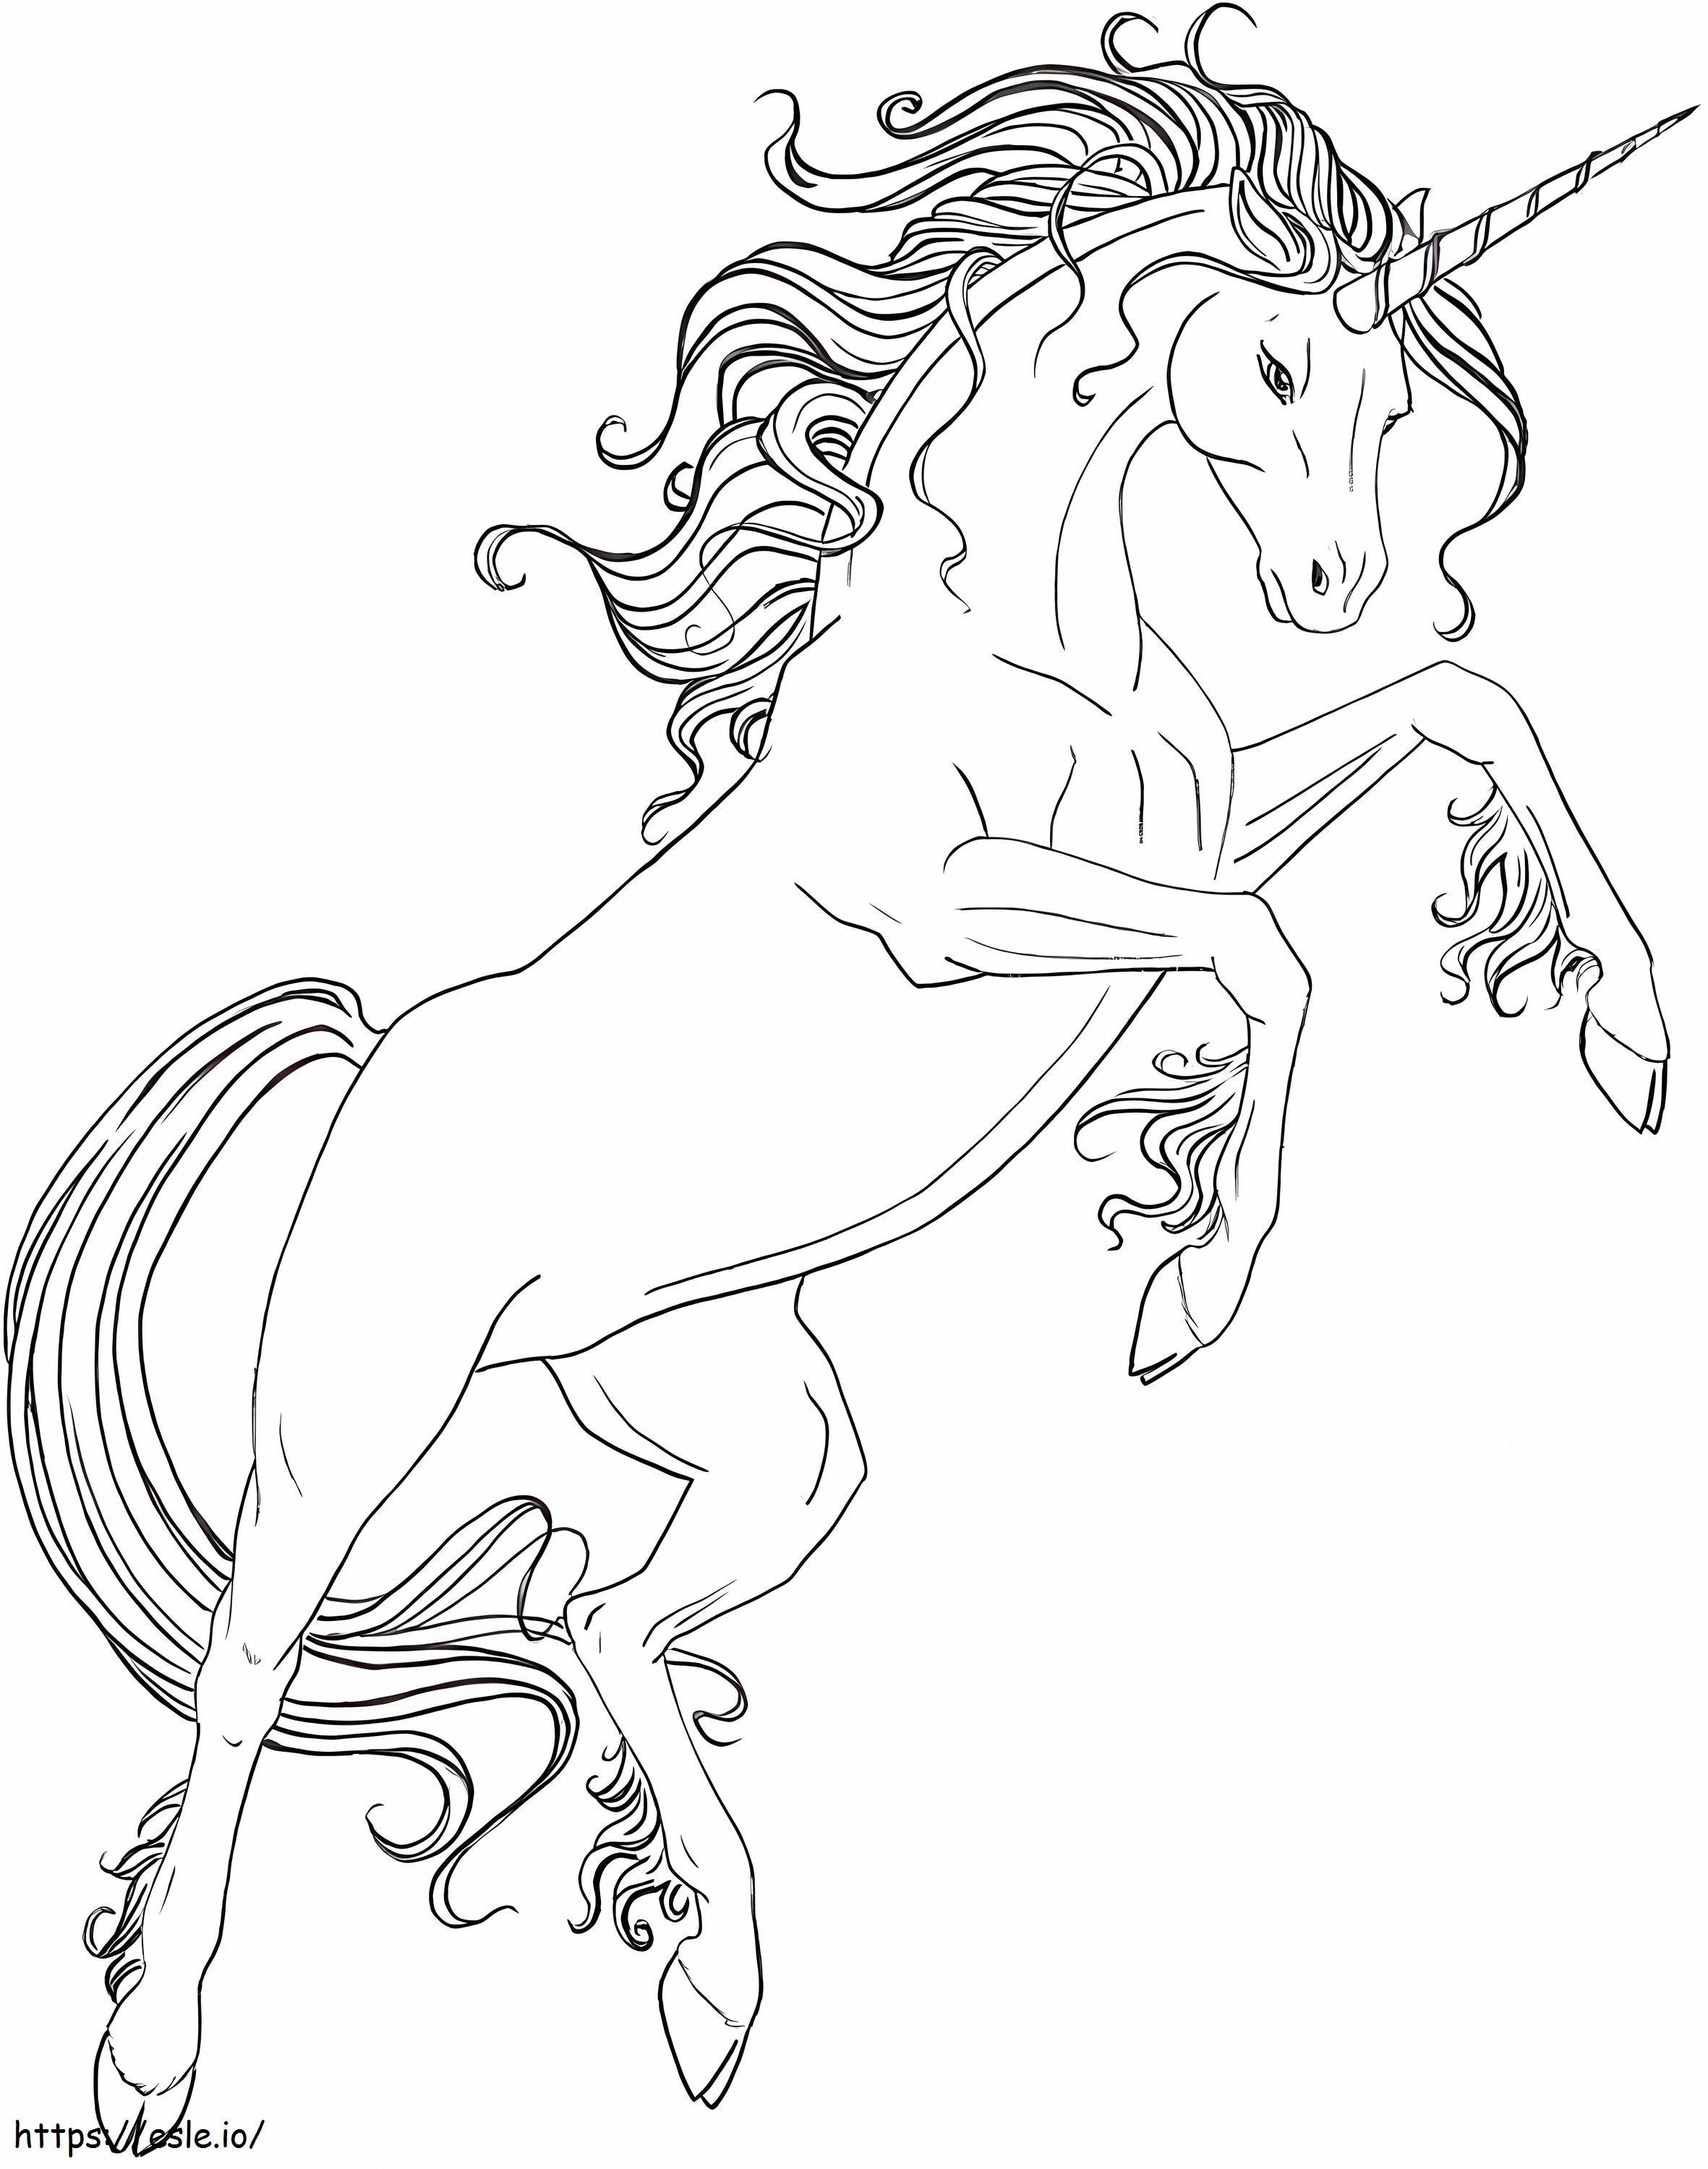 Unicorn Jumping A4 coloring page